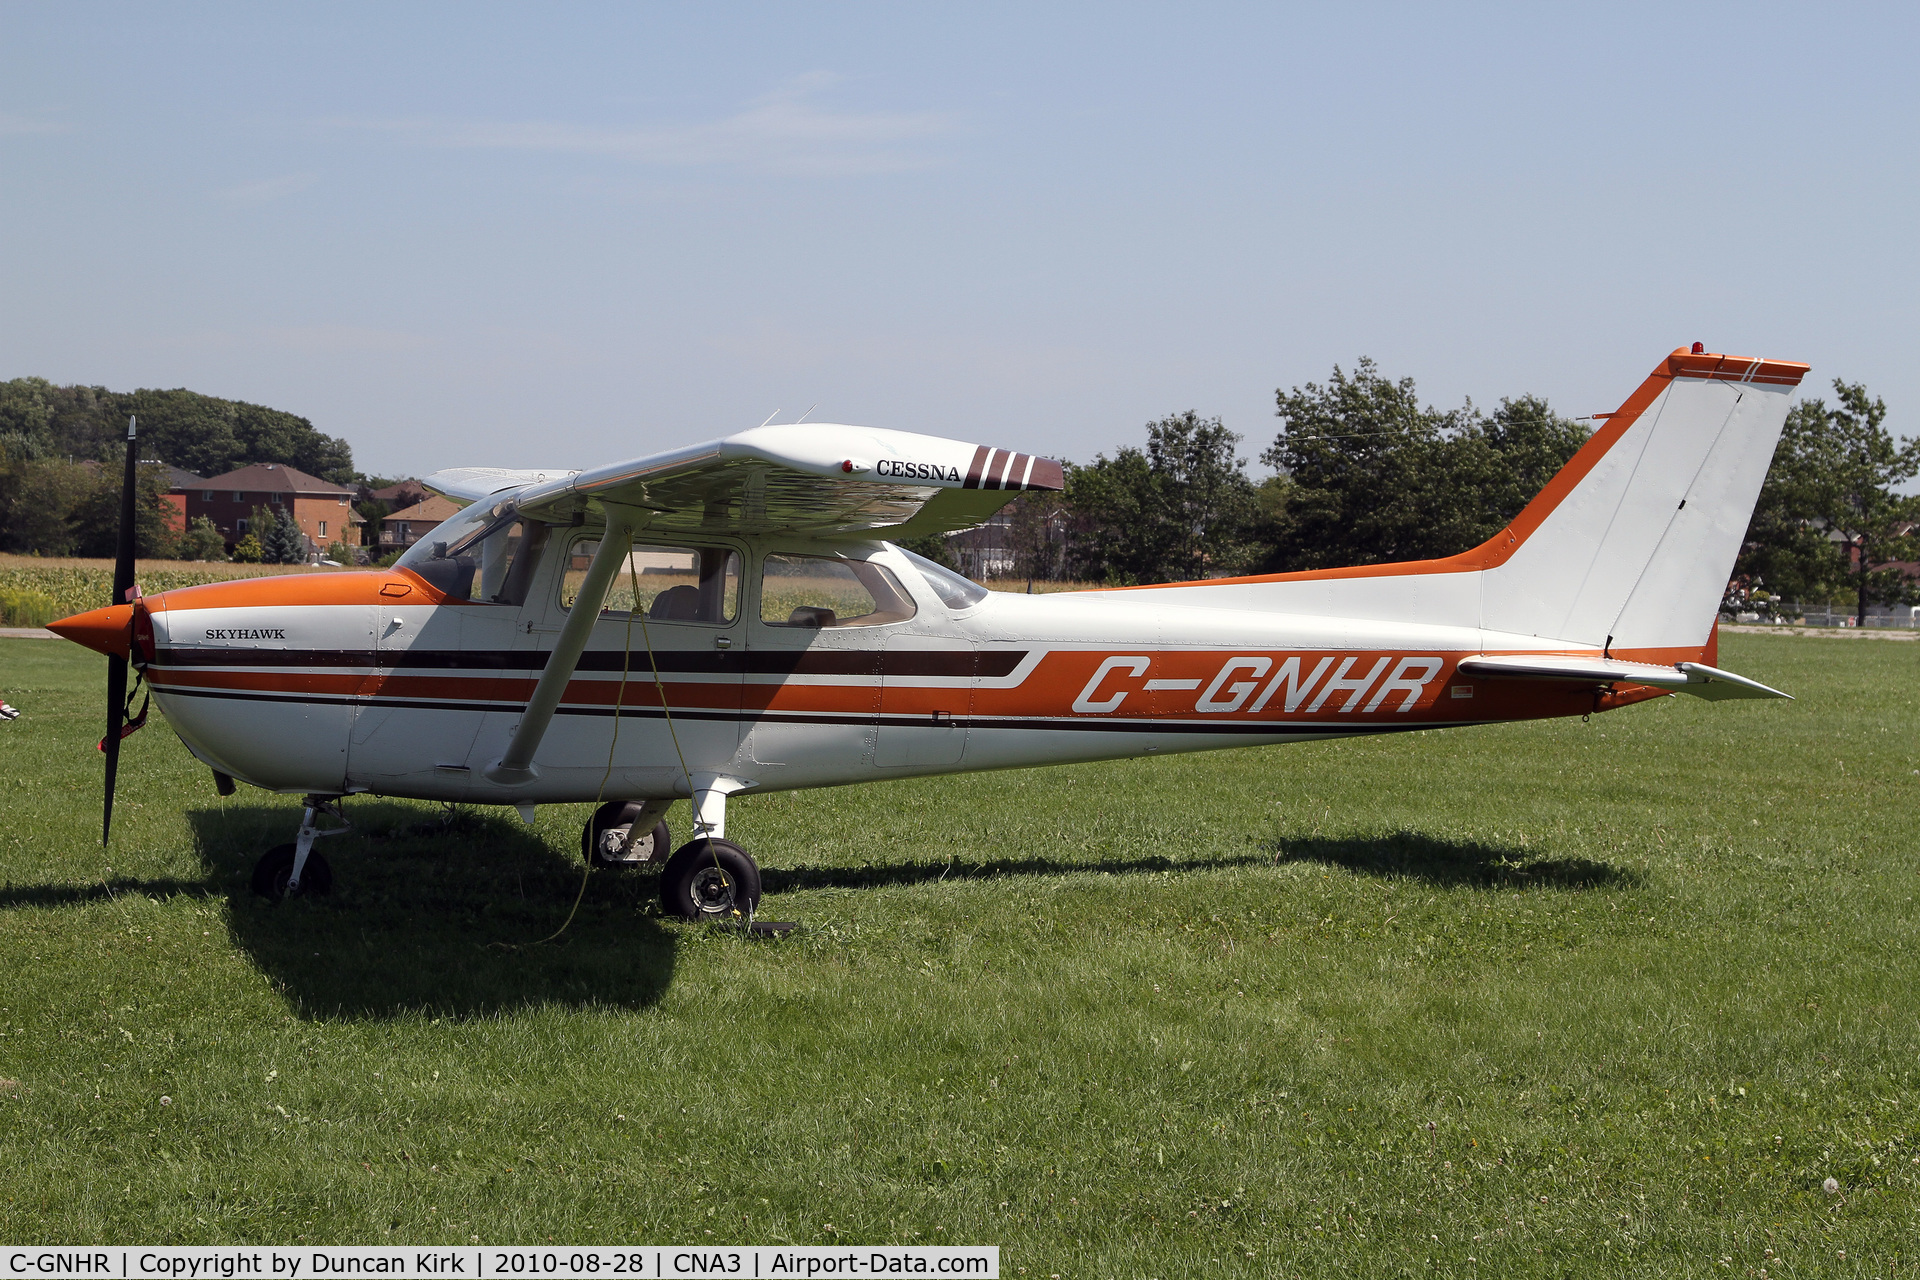 C-GNHR, 1975 Cessna 172M C/N 17264751, Springwater is an interesting airfield intertwined with golfing